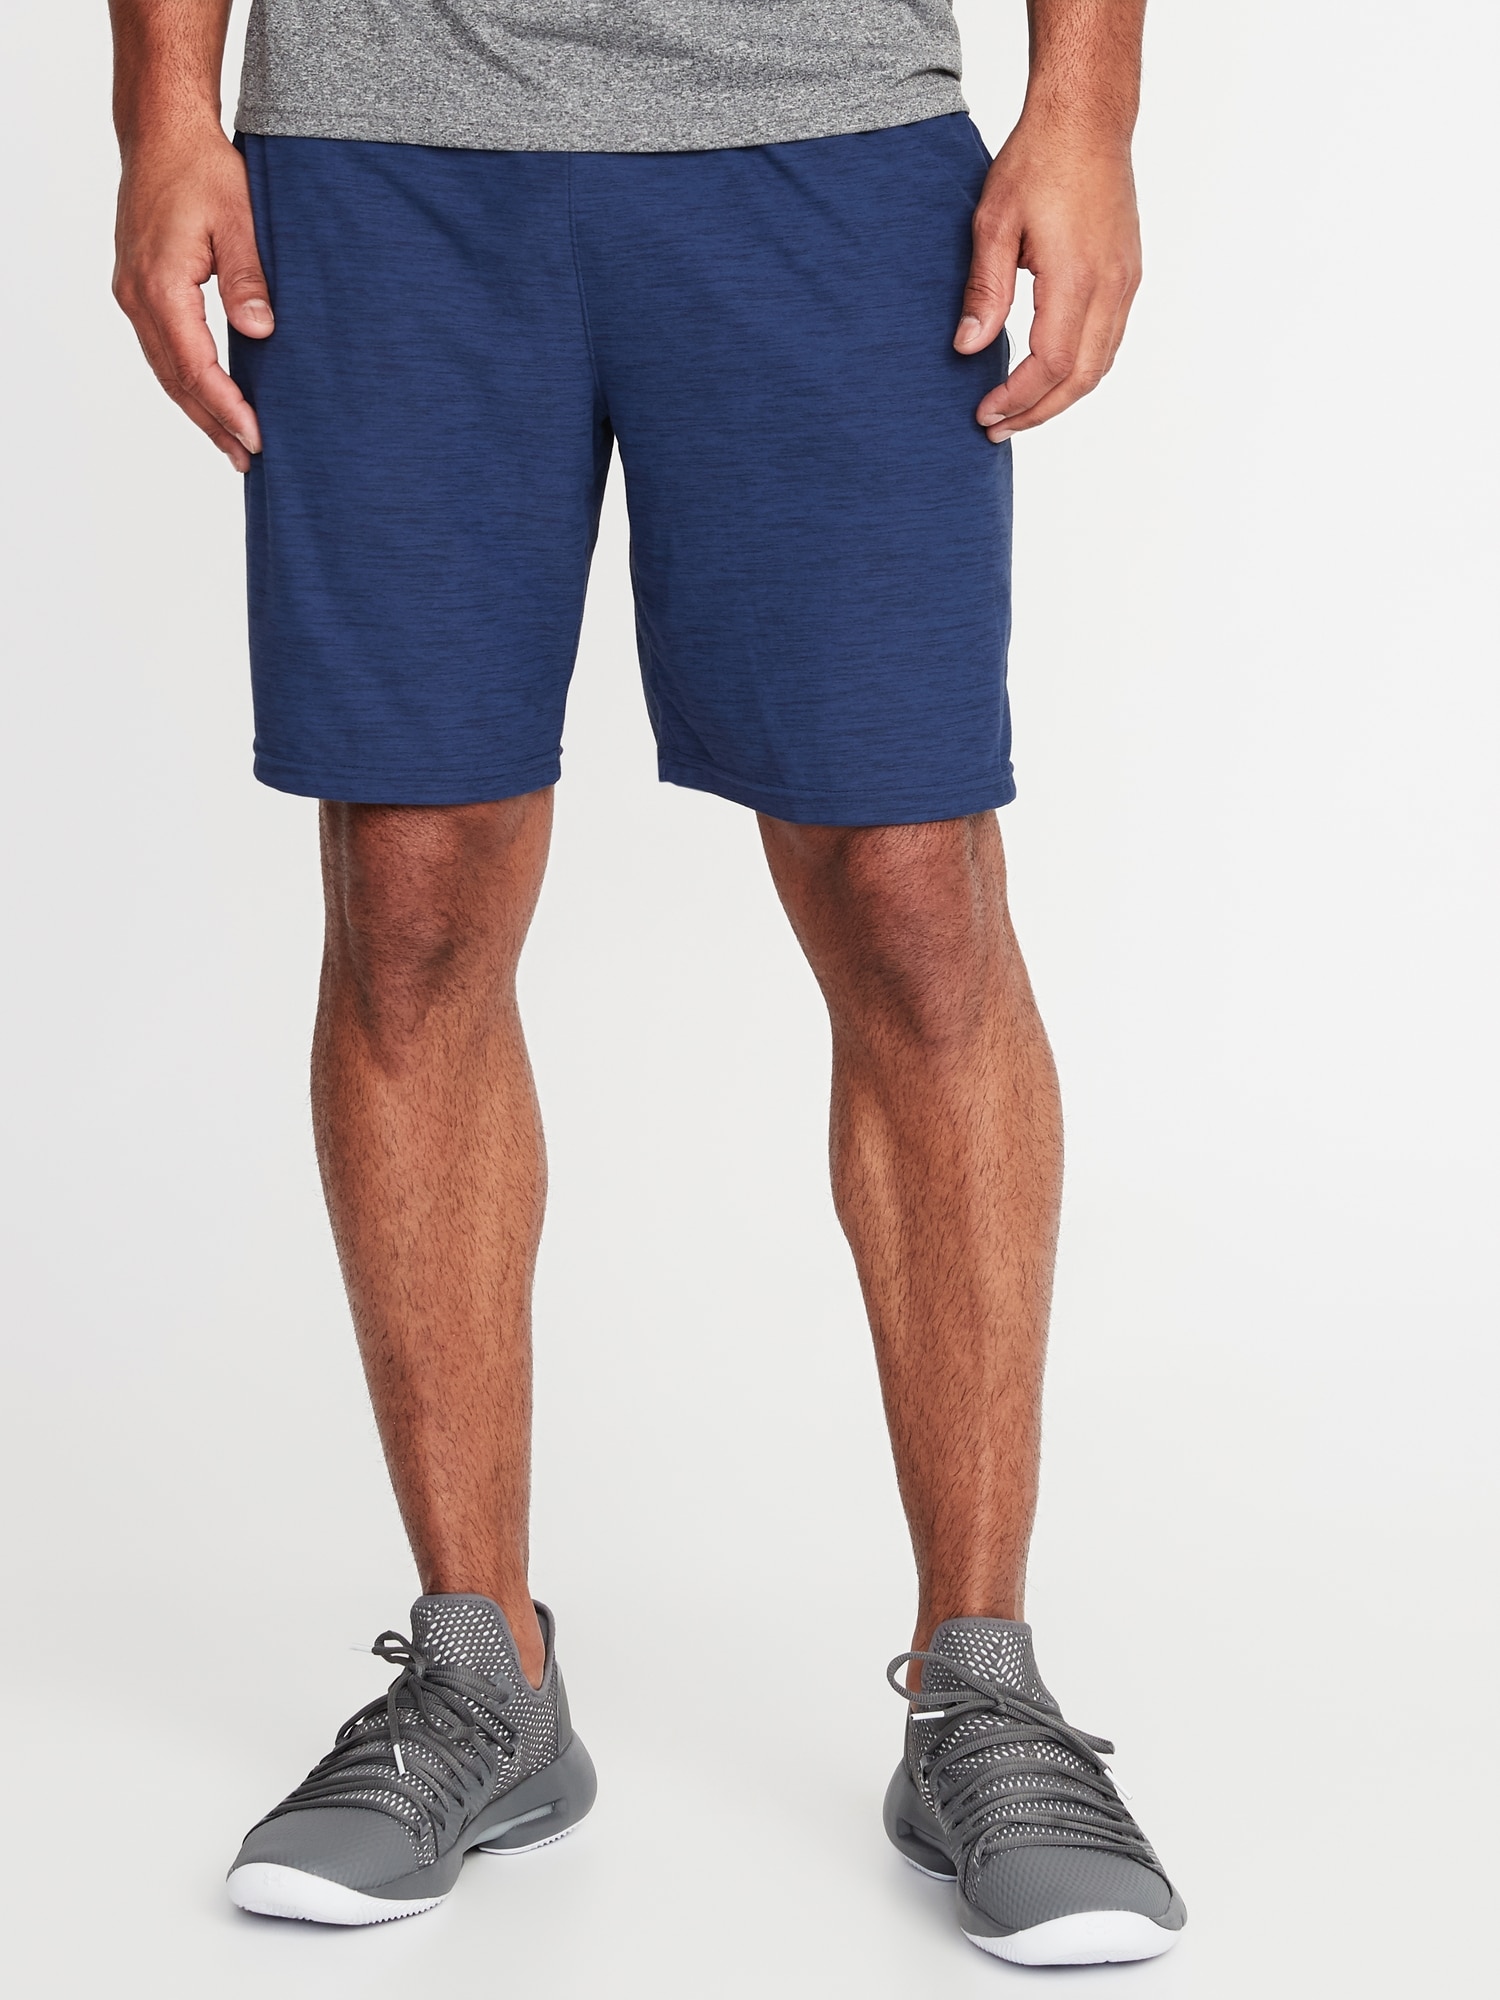 Old Navy Ultra-Soft Breathe ON Shorts for Men - 9-inch inseam